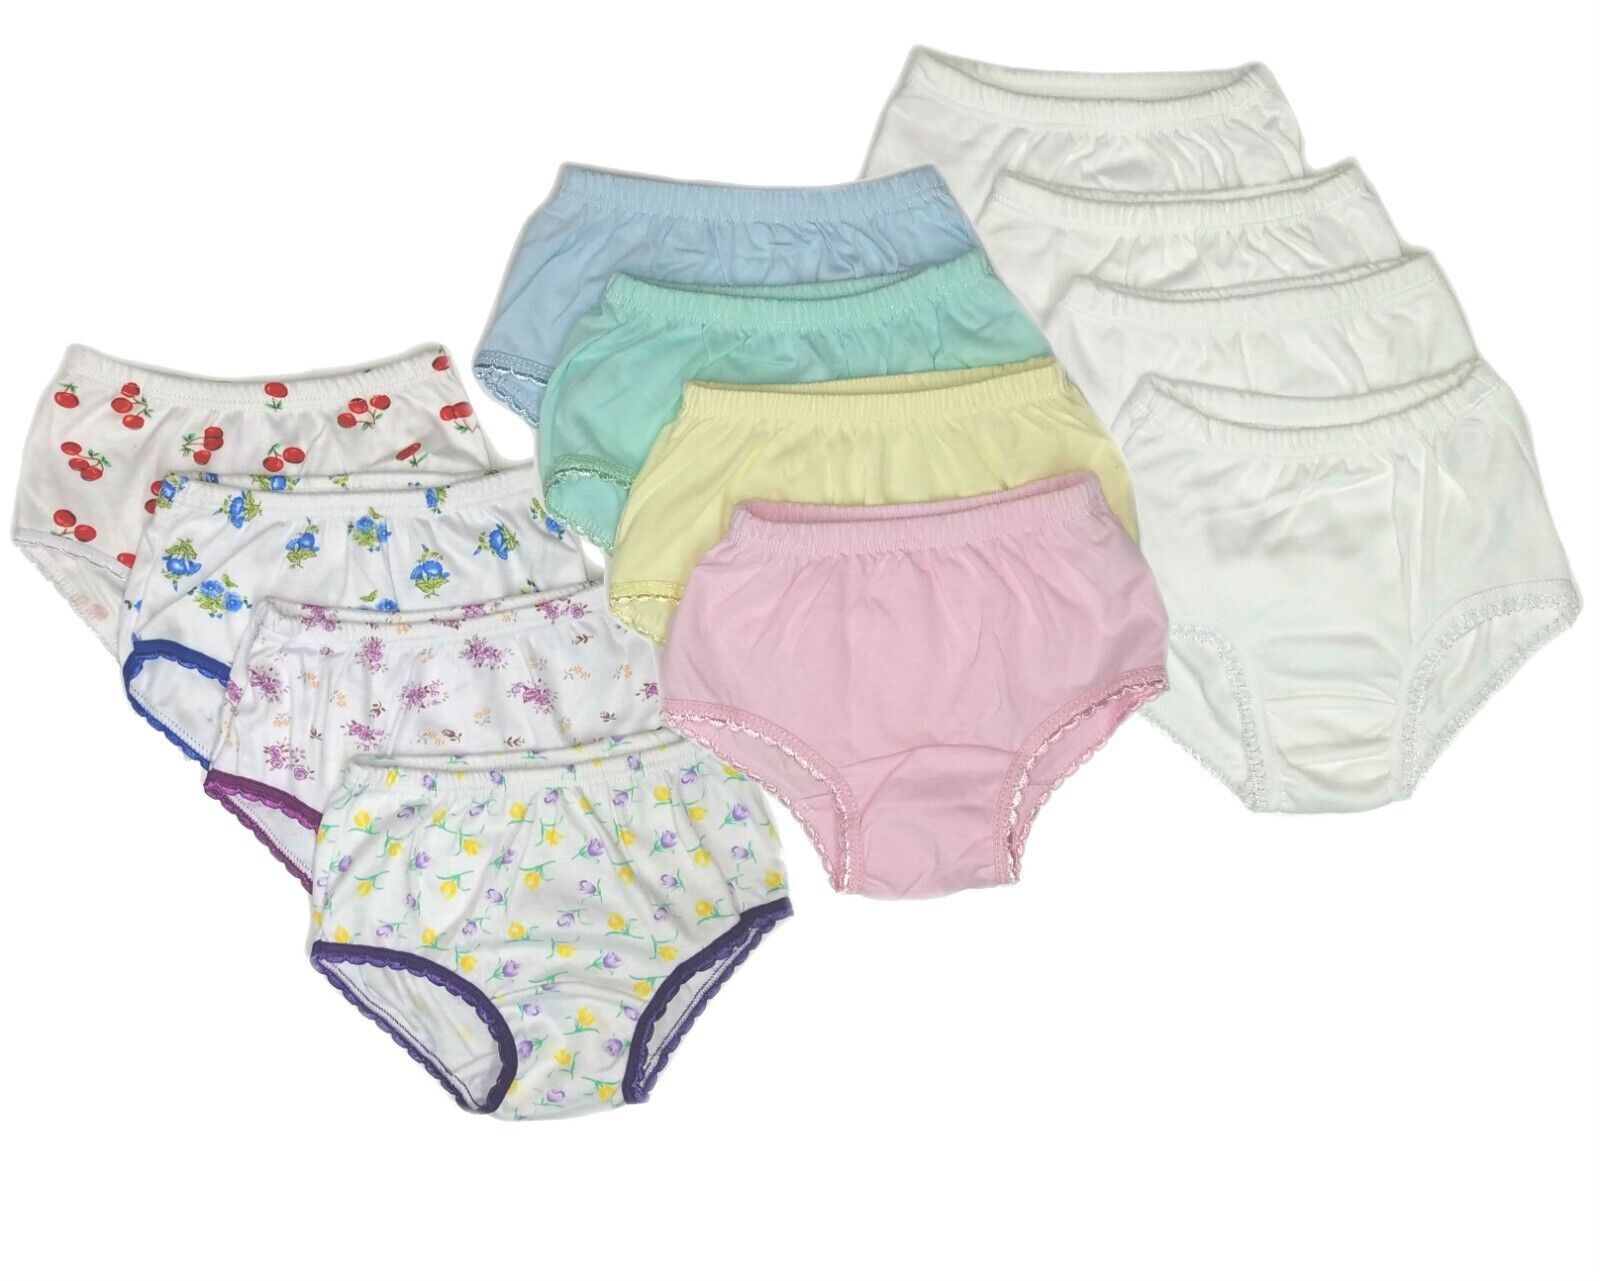 Buy Panty For Baby Girl 8 Months Old online